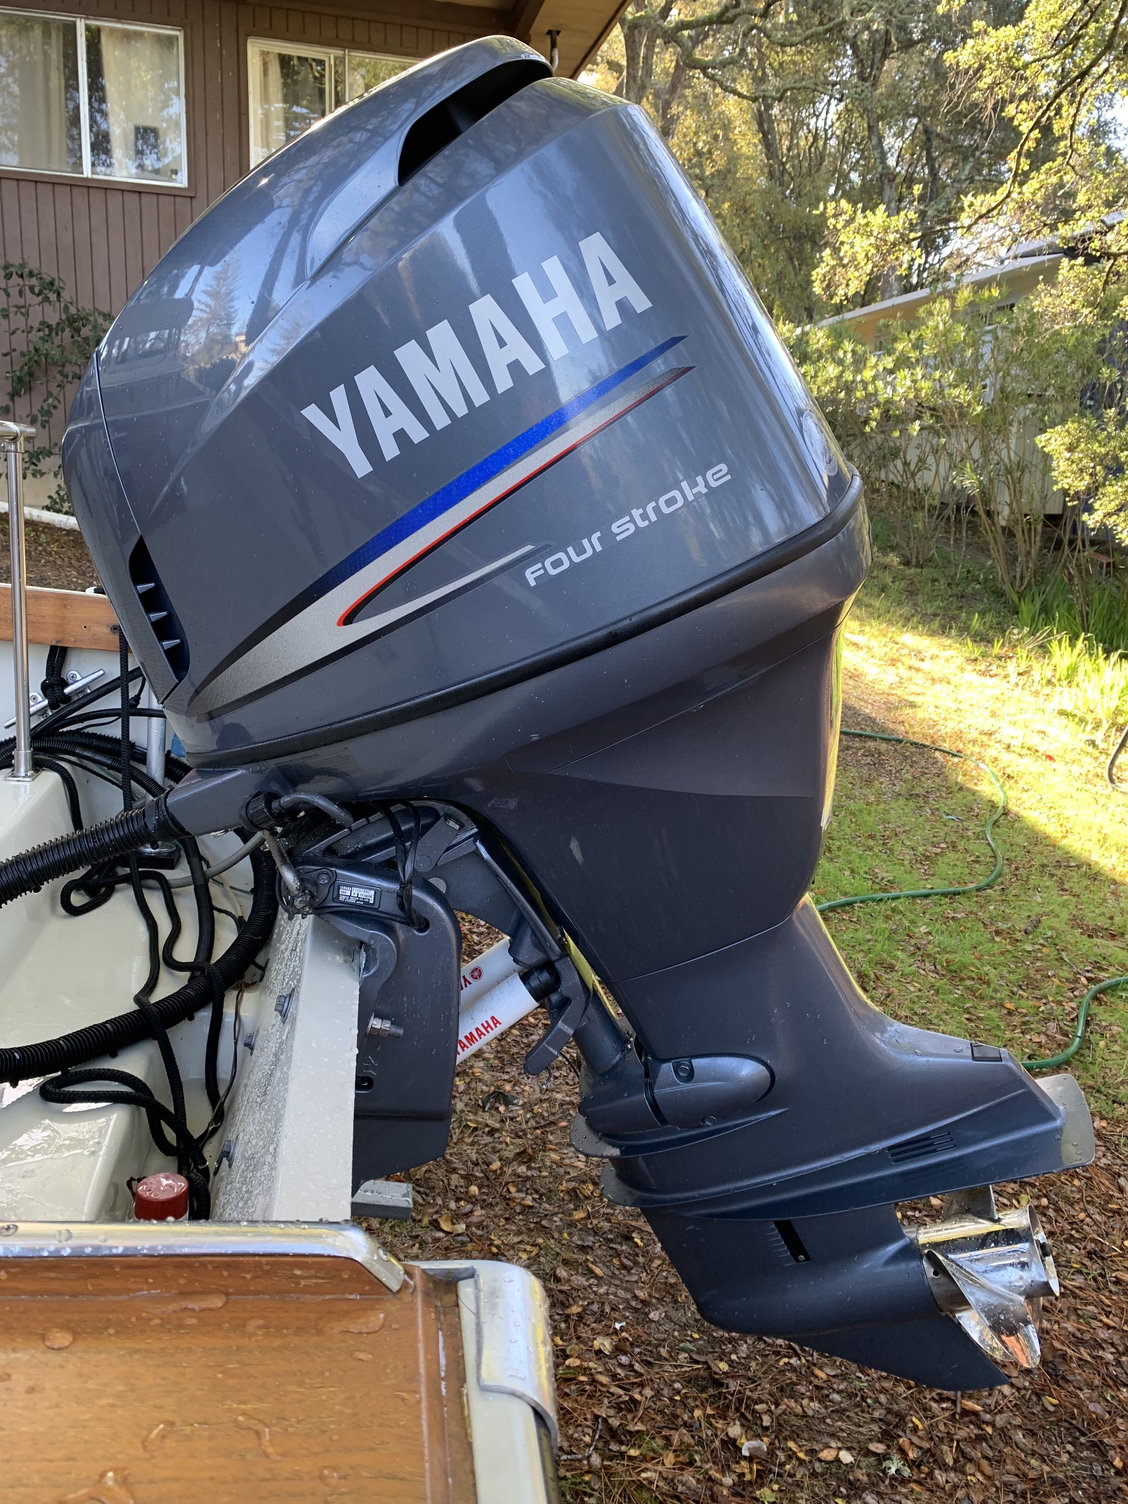 For sale Yamaha 115 TXRB outboard The Hull Truth Boating and